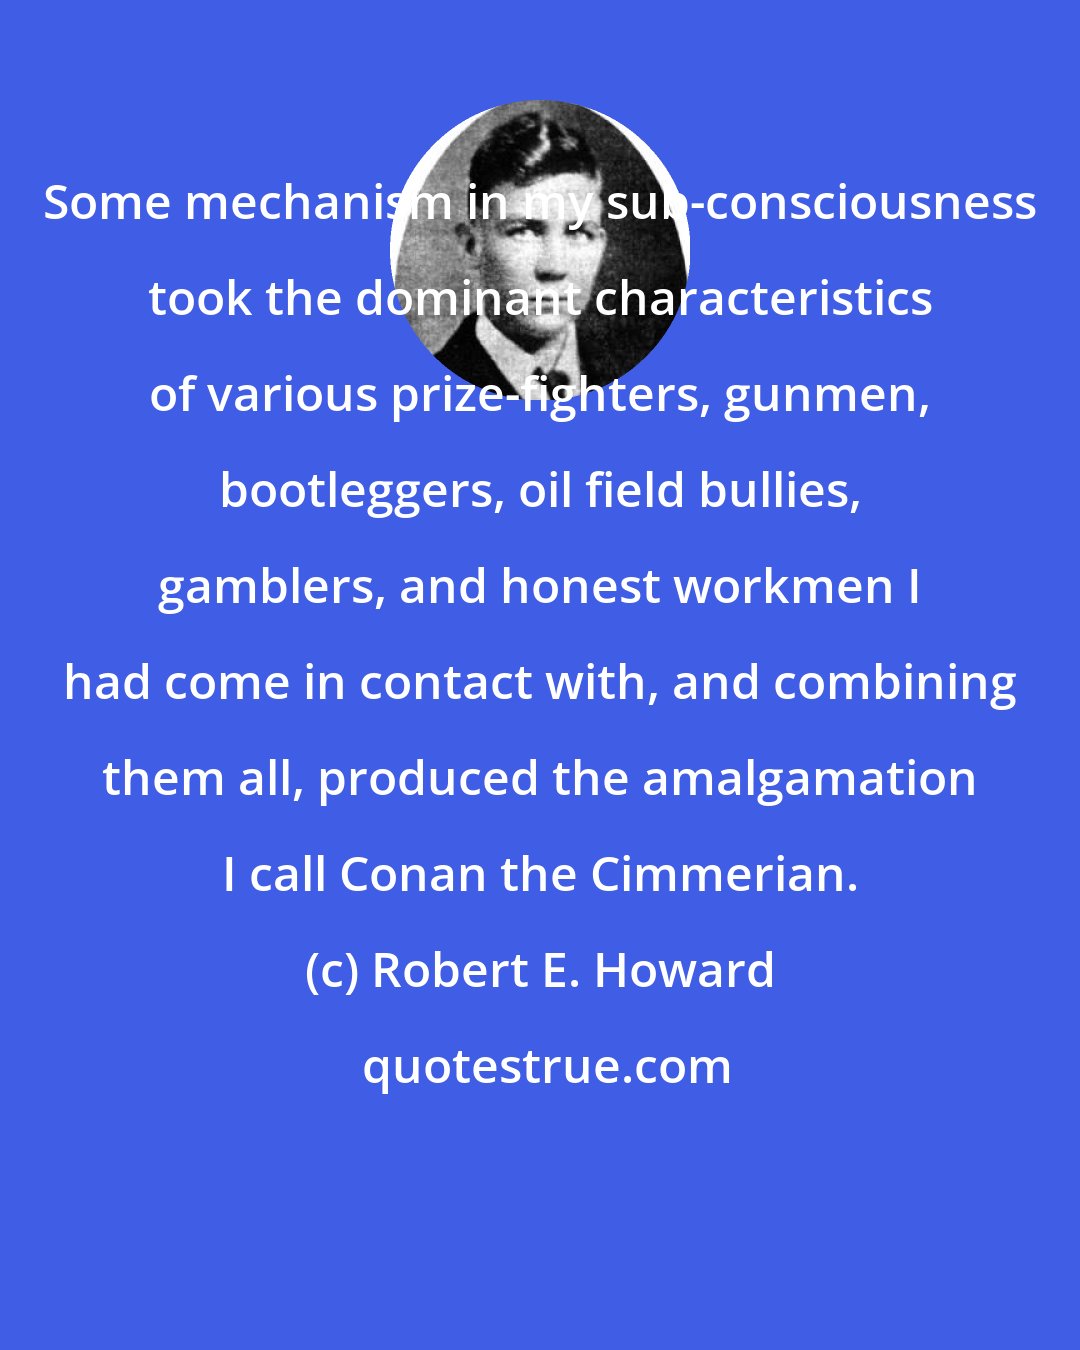 Robert E. Howard: Some mechanism in my sub-consciousness took the dominant characteristics of various prize-fighters, gunmen, bootleggers, oil field bullies, gamblers, and honest workmen I had come in contact with, and combining them all, produced the amalgamation I call Conan the Cimmerian.